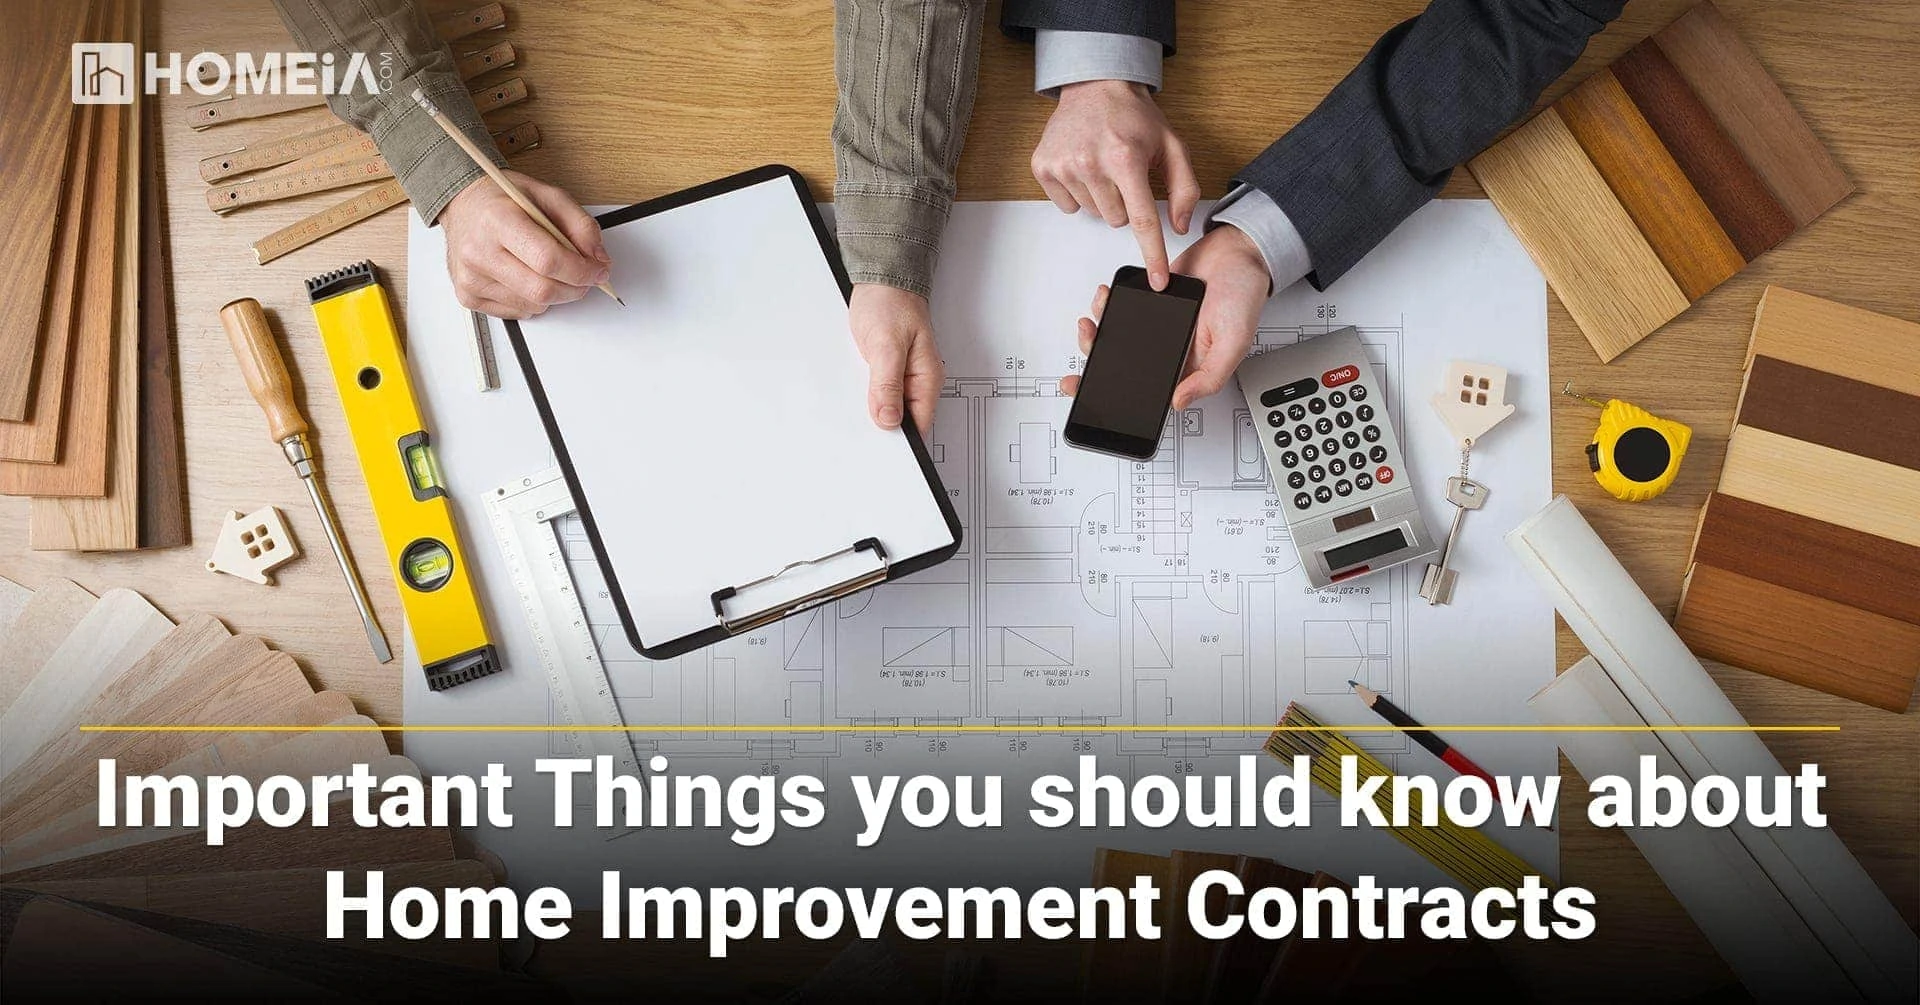 16 Important Things to Know about Home Improvement Contracts